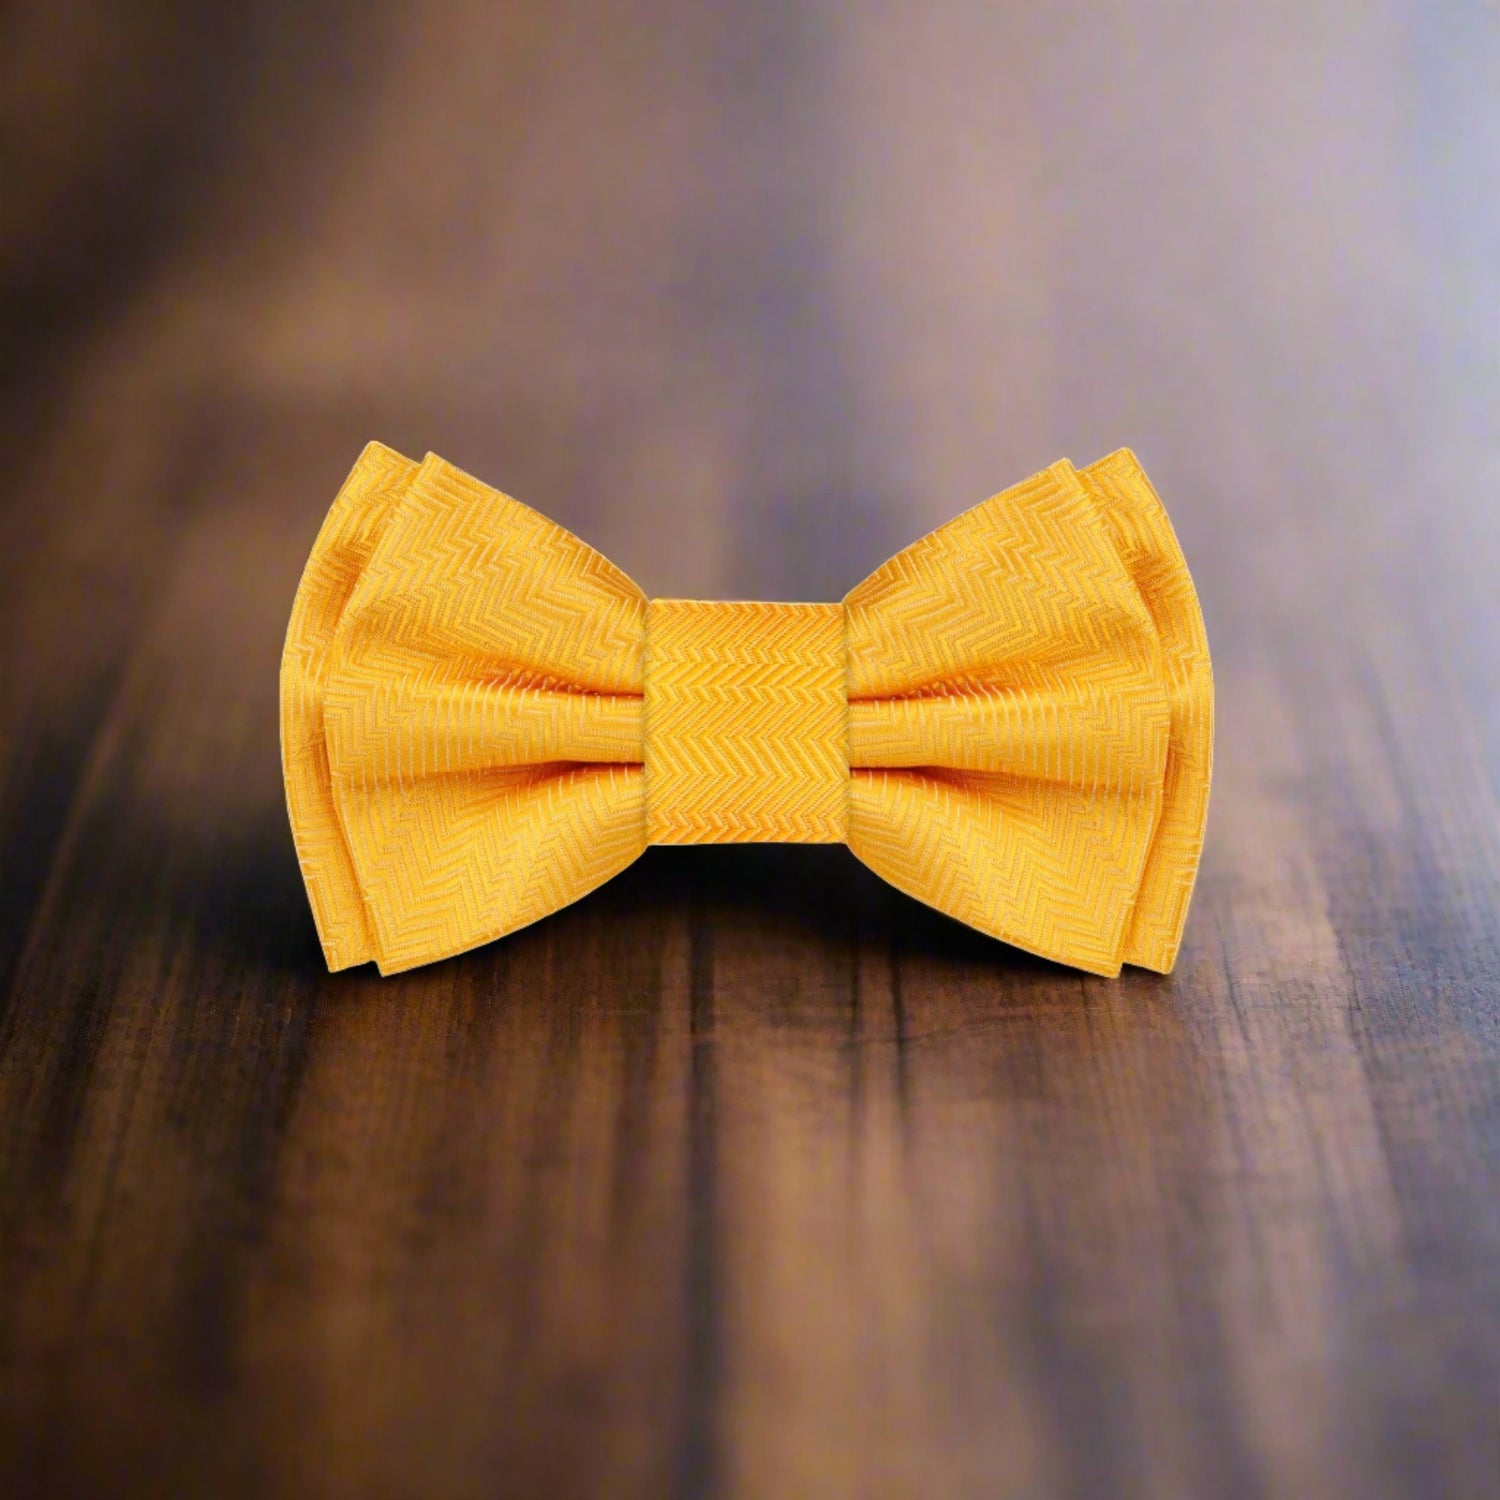 A Tuscany Yellow Solid Pattern Self Tie Bow Tie 